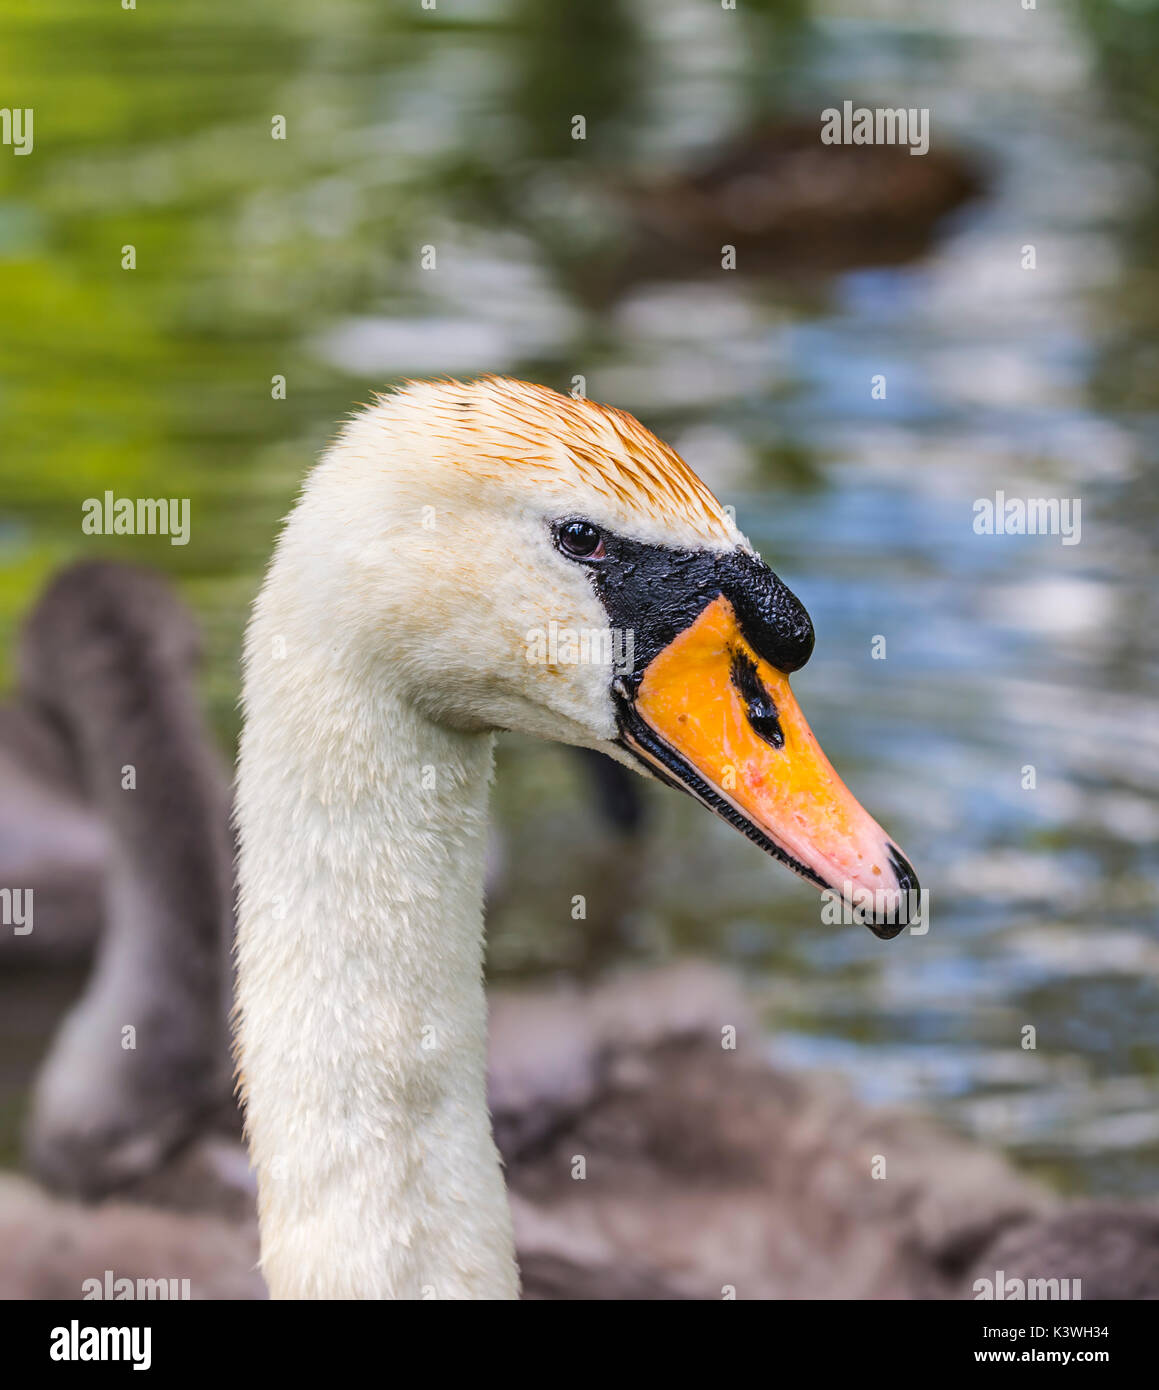 White Mute Swan (Cygnus olor) neck and head portrait, close up. Stock Photo